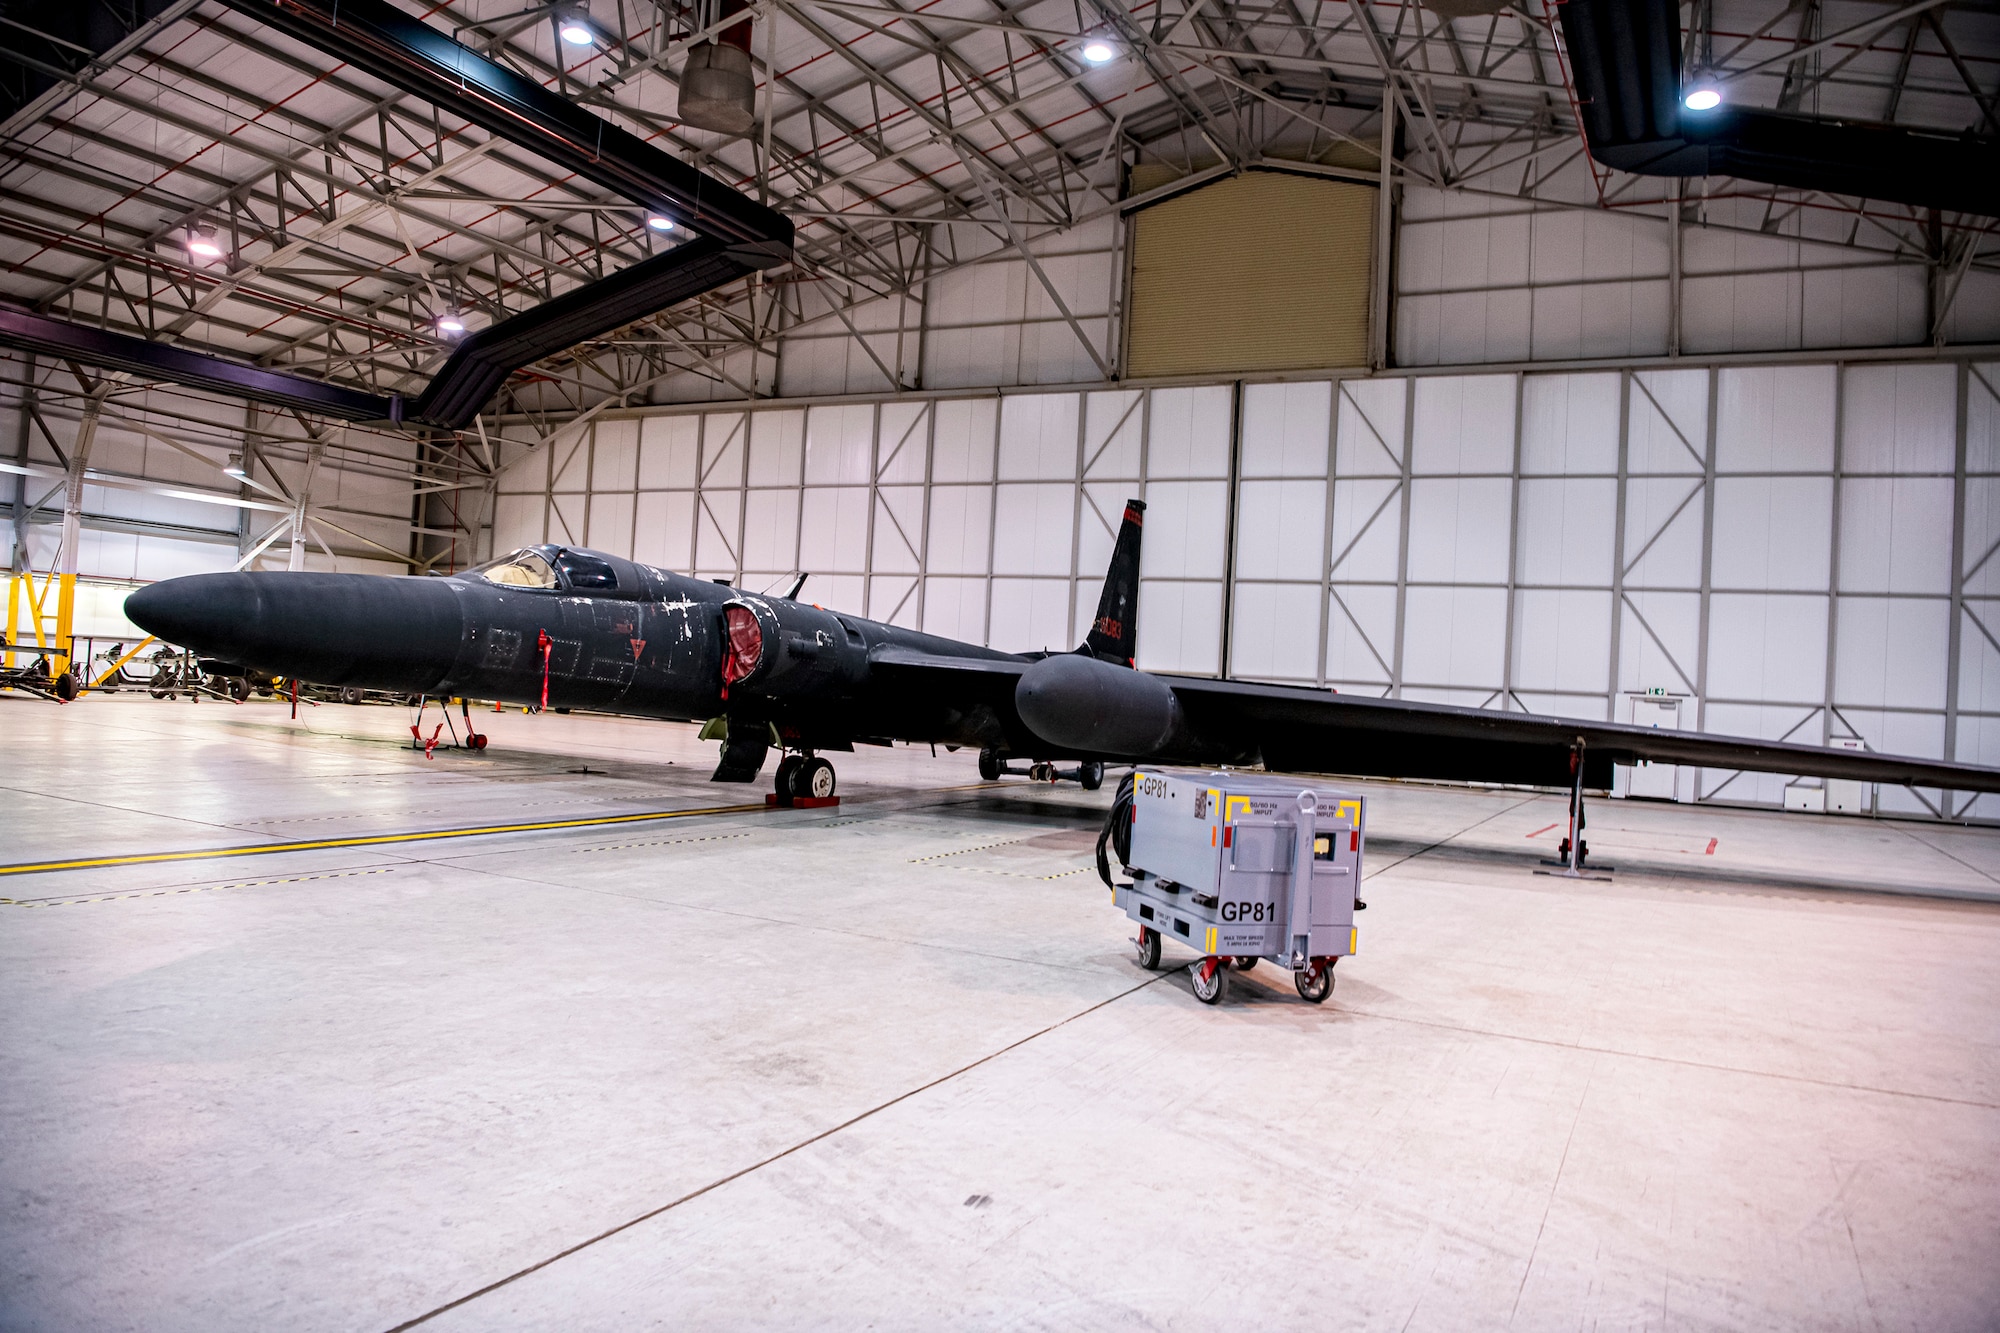 A U-2 Dragon Lady rests in a hangar at RAF Fairford, England, July 7, 2020. The U-2 aircraft assigned to the 9th Reconnaissance Wing, Beale Air Force Base, Calif., are currently deployed to RAF Fairford as part of the 99th Expeditionary Reconnaissance Squadron. The aircraft supplements a variety of missions that enhance regional and global security in support of U.S. and NATO allies and regional partners. (U.S. Air Force photo by Senior Airman Eugene Oliver)